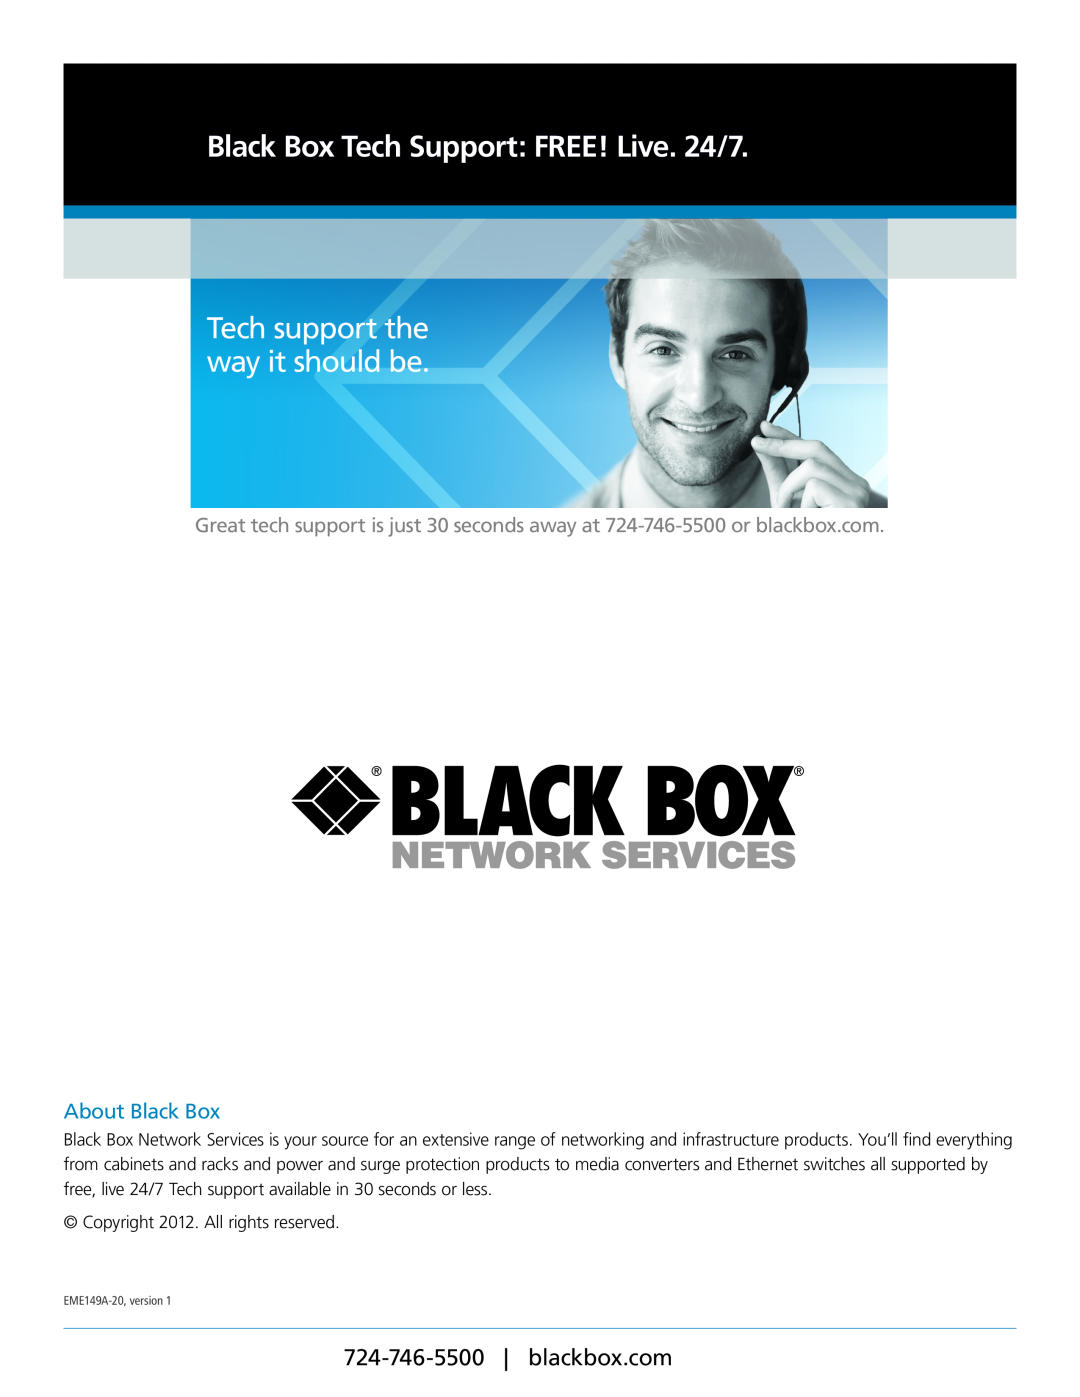 Black Box EME149A-60 manual About Black Box, Black Box Tech Support FREE! Live. 24/7, Tech support the way it should be 